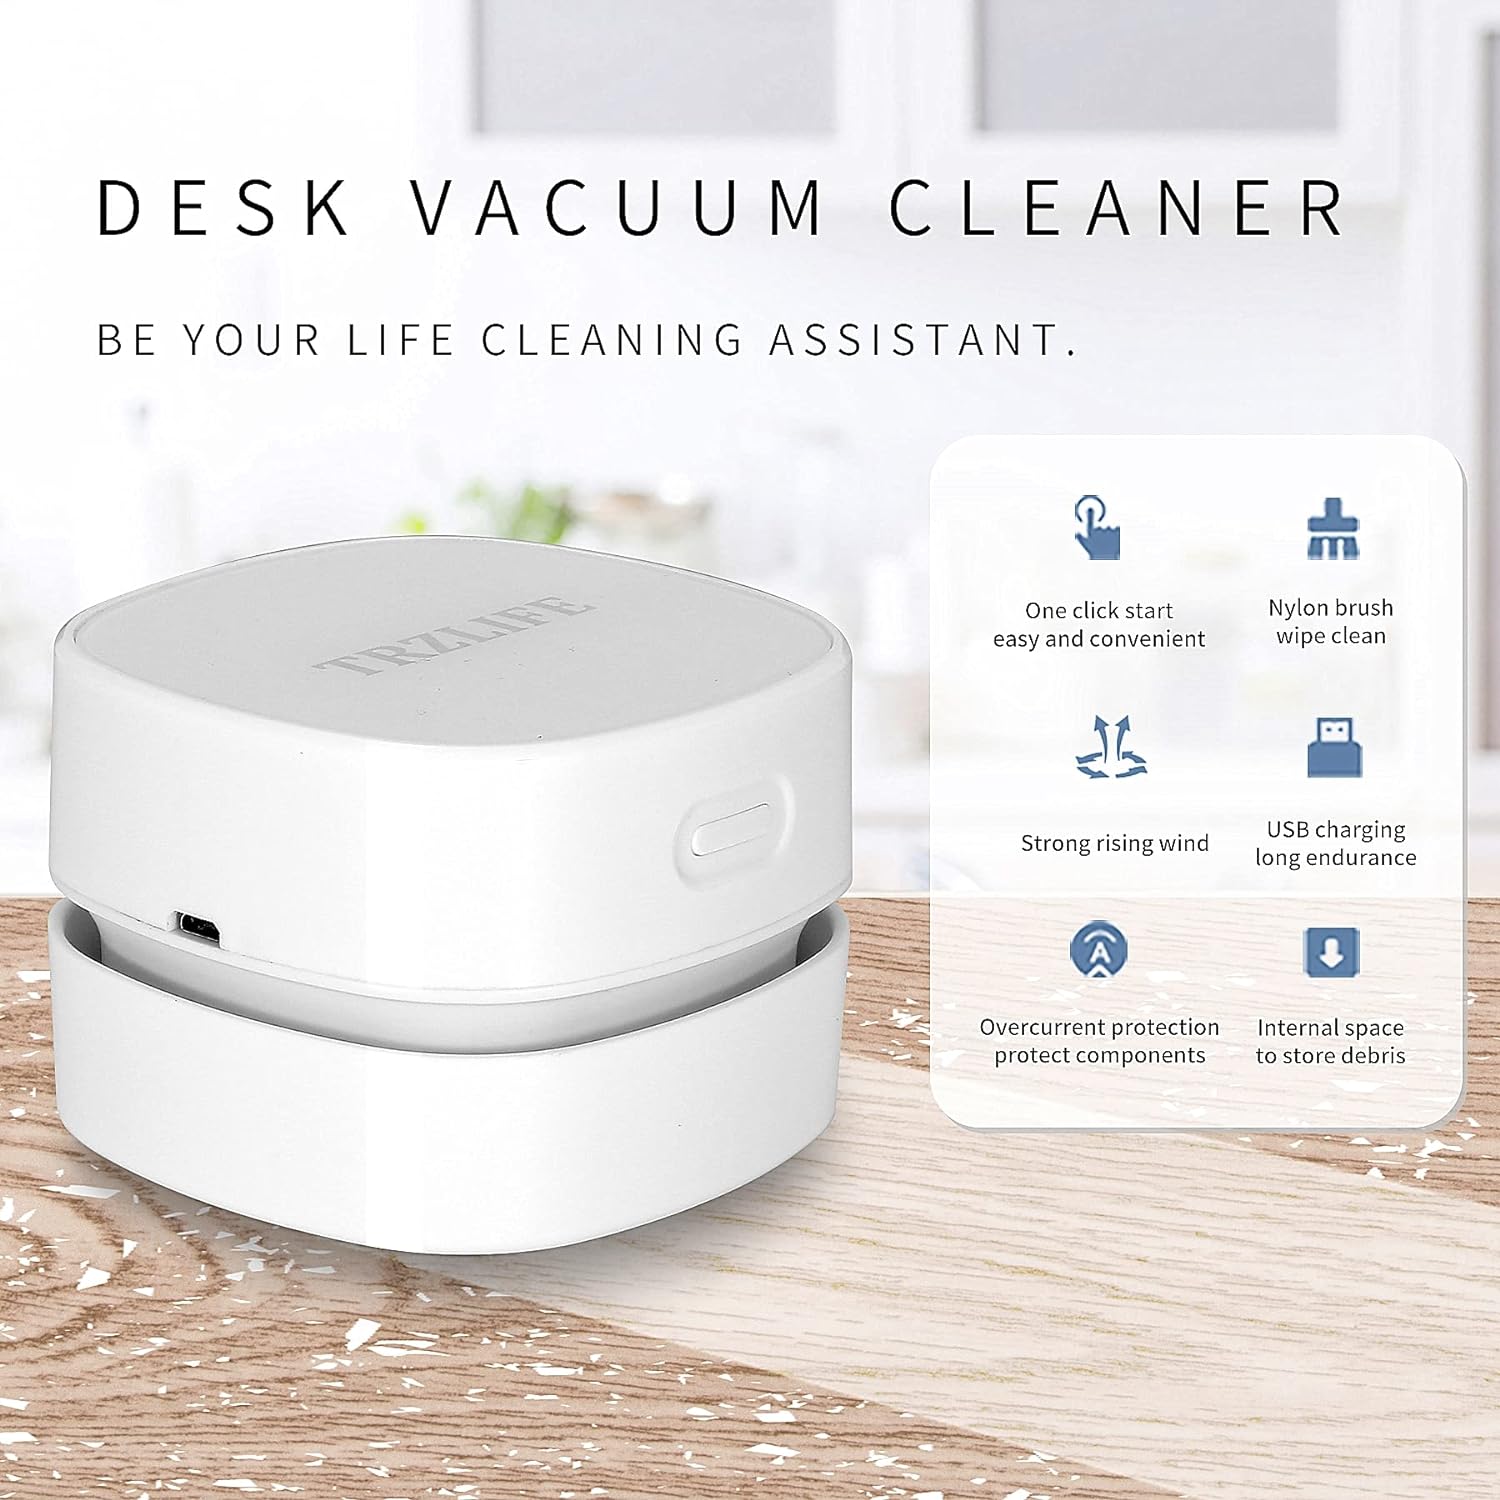 Trzlife Desk Vacuum Cleaner, Upgraded Mini Table Vacuum Improved Details Higher Suction More Durable Rechargeable Energy Saving Mini Vac Picks Up Tiny Items Crumbs Flakes For Desktop Drawer Countertop